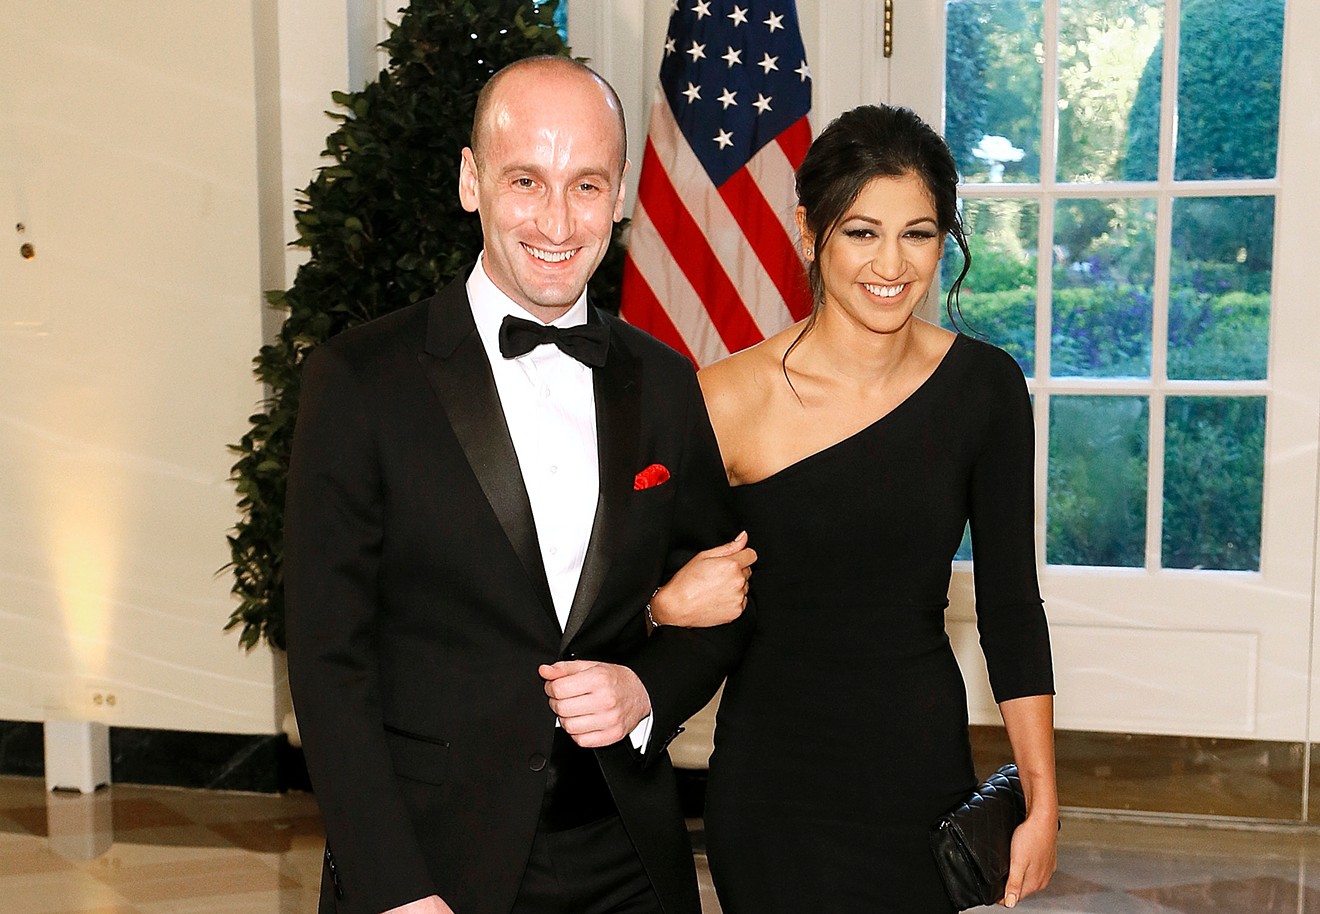 Stephen and Katie Miller at the White House in 2019.